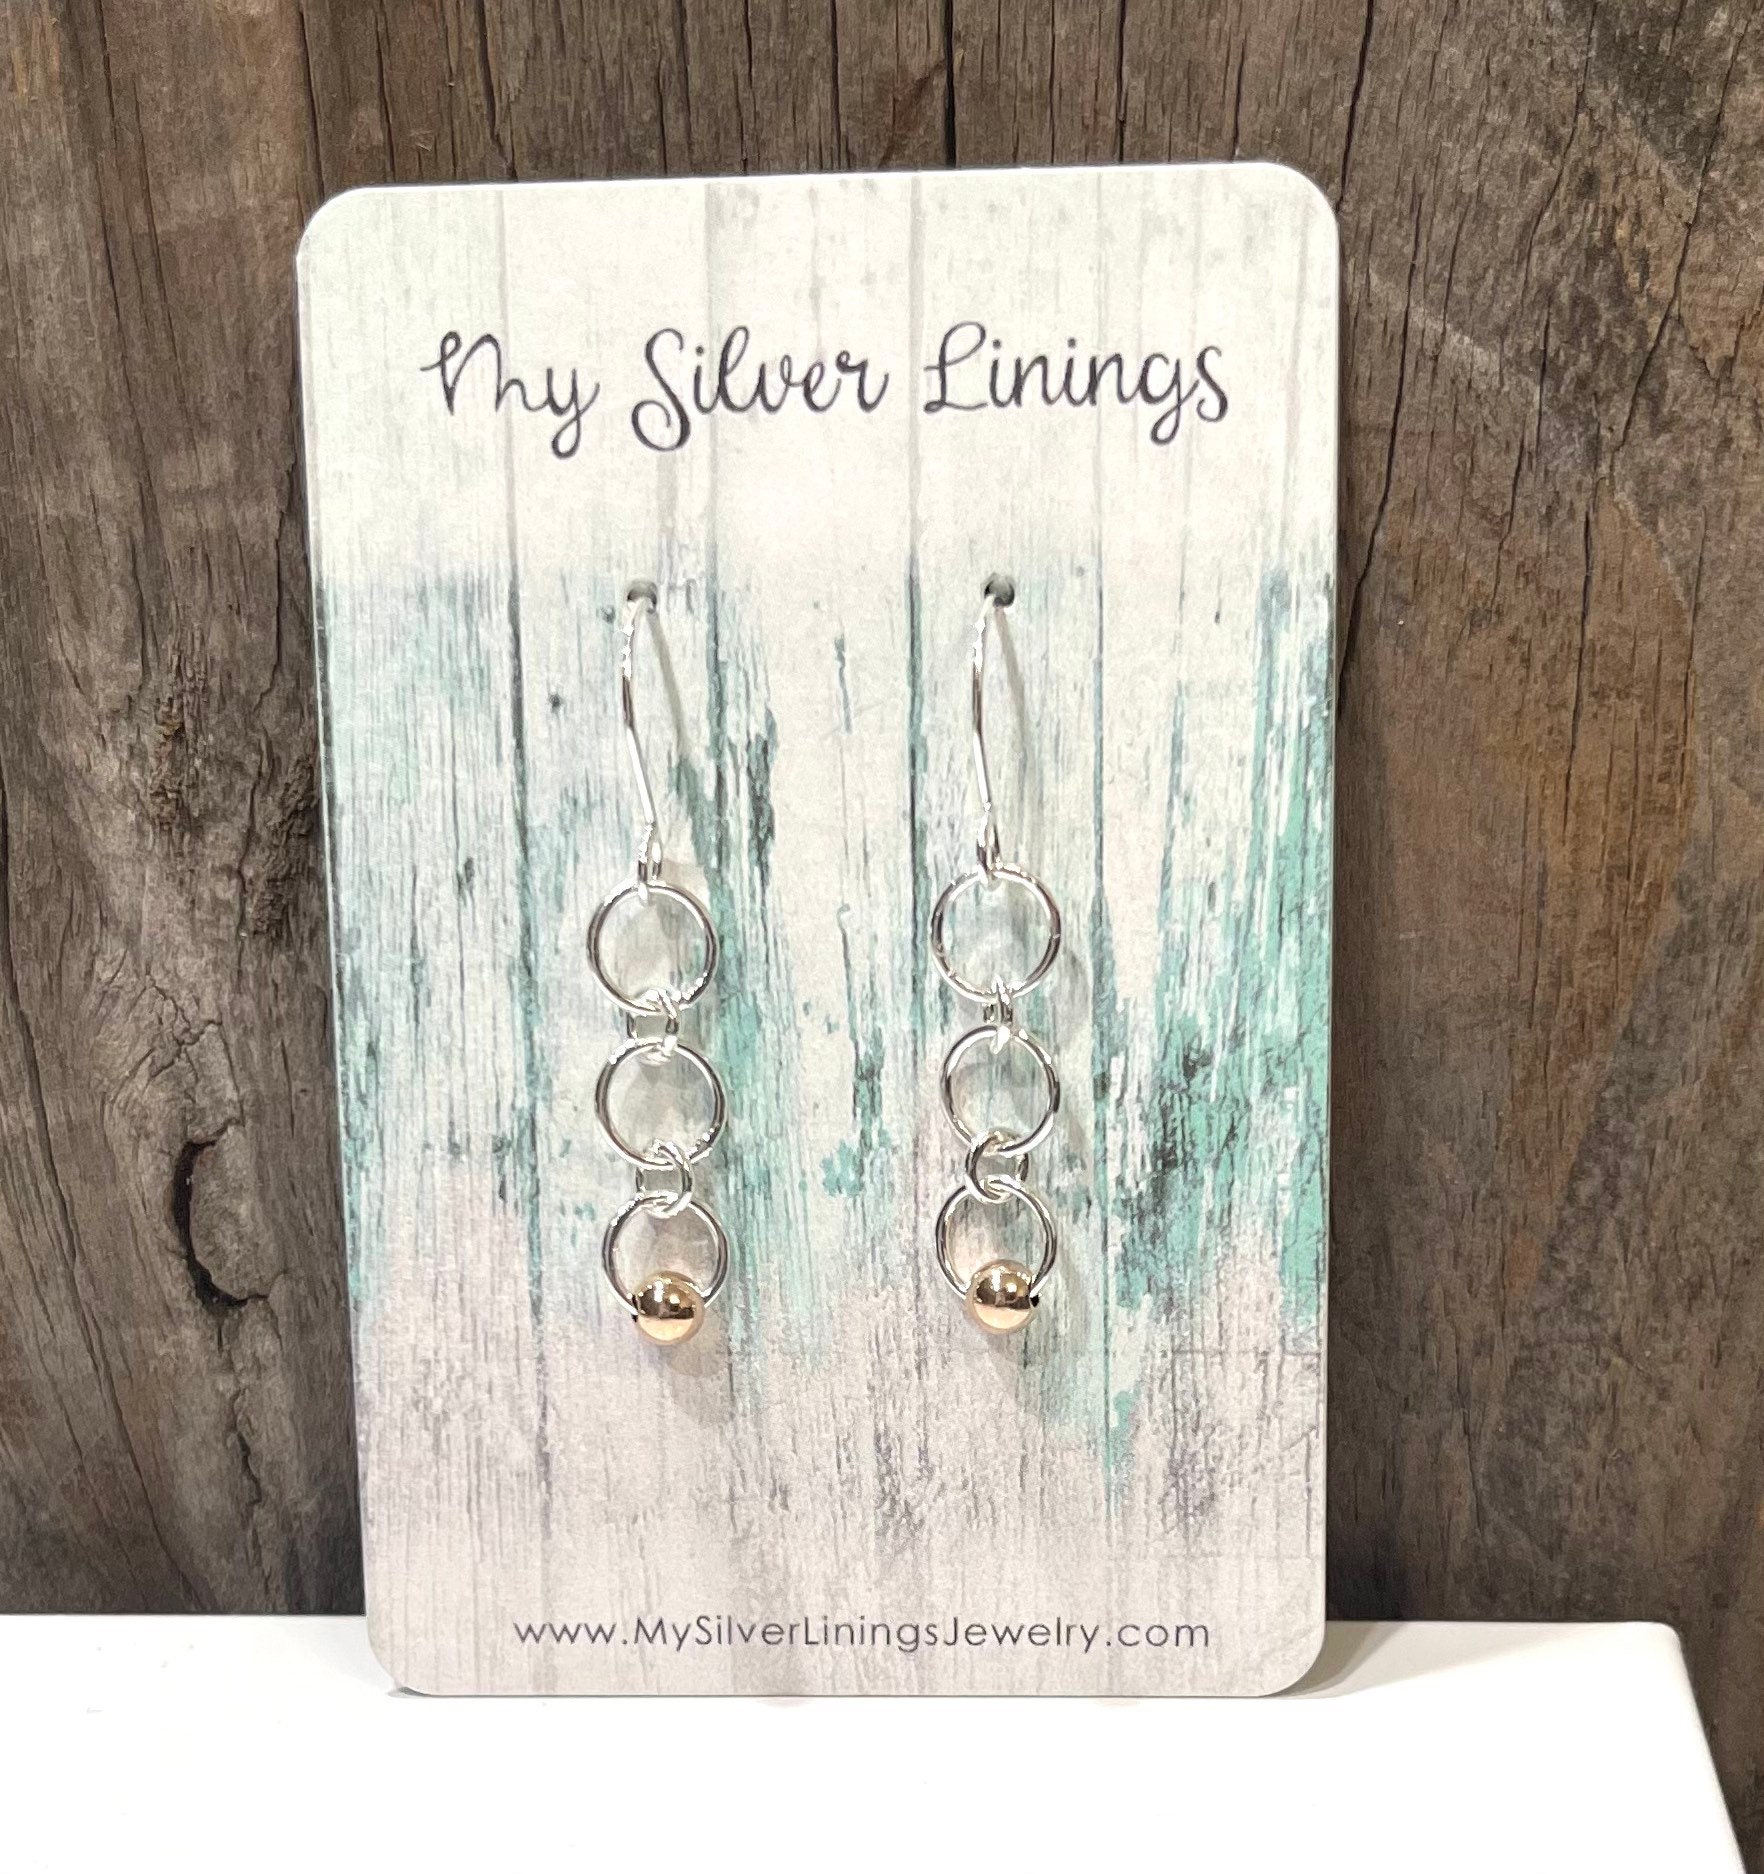 Details about   Sterling Silver "NAME YOUR STONE" Gemstone Dangle Earrings #1474...Handmade USA 